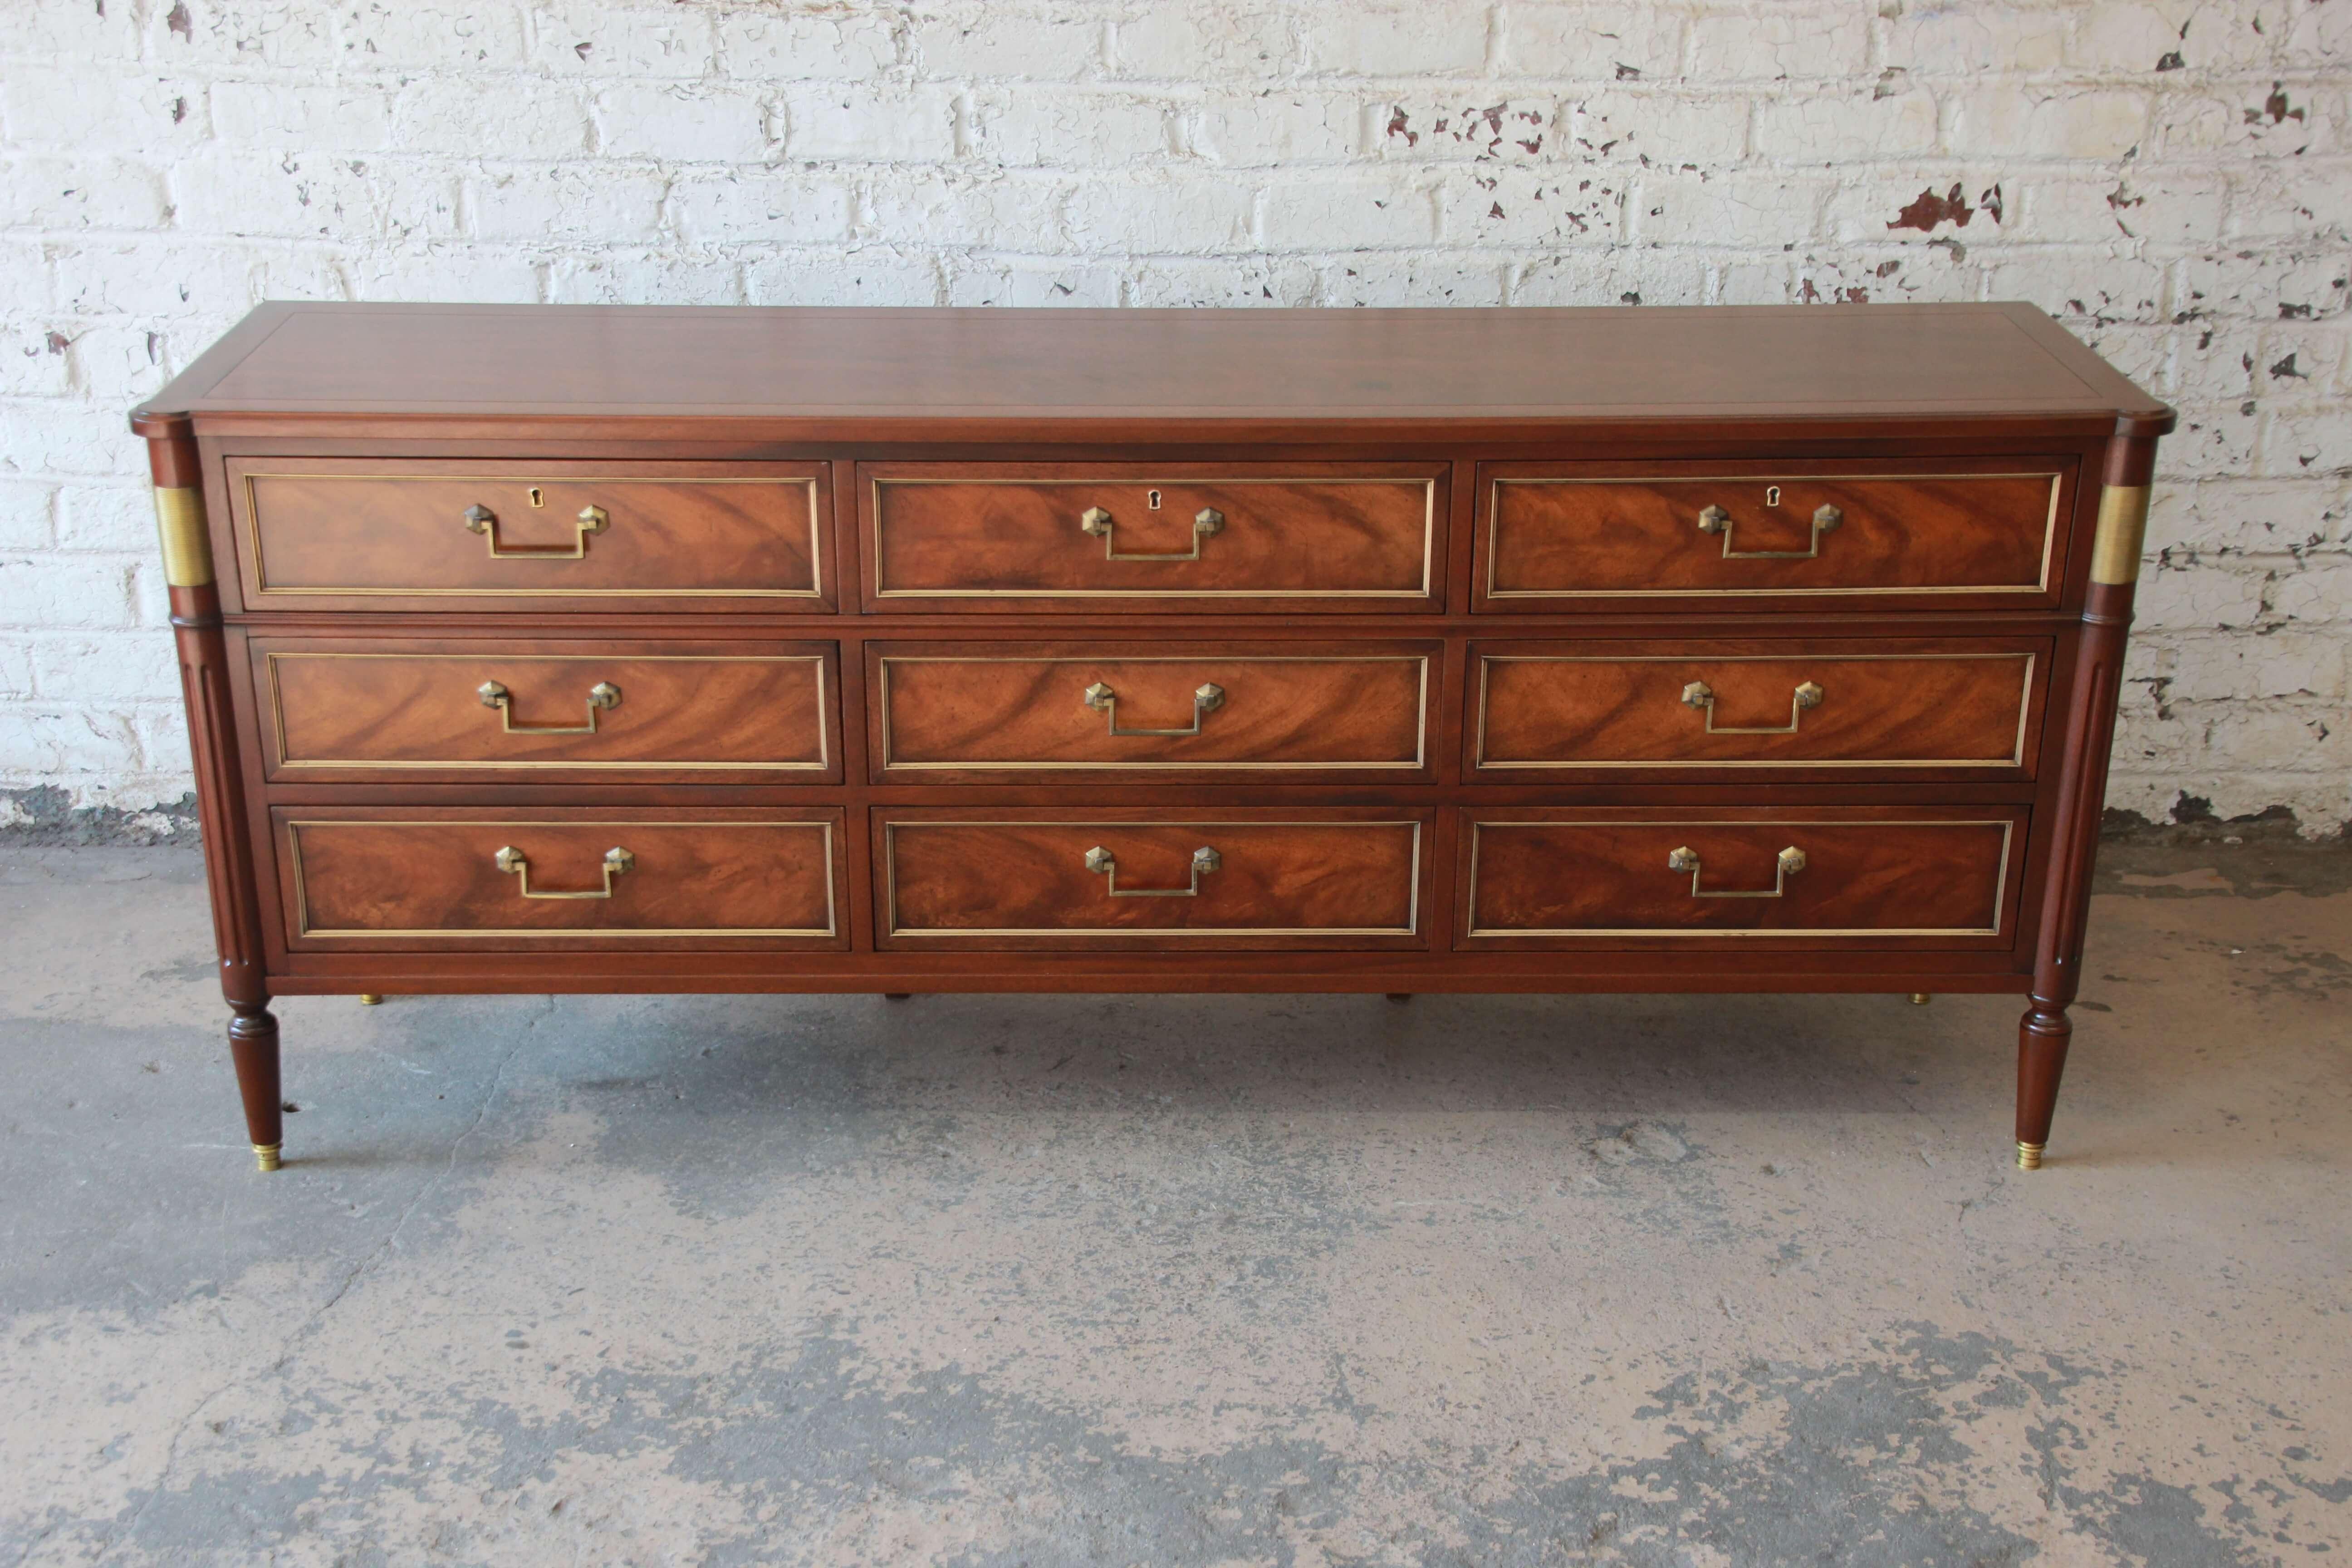 Offering a stunning Baker Furniture Regency style dresser or Credenza. The piece has been expertly refinished and features nice brass accents and stunning mahogany wood grain. Each or the nine drawers open and close smoothly with original brass